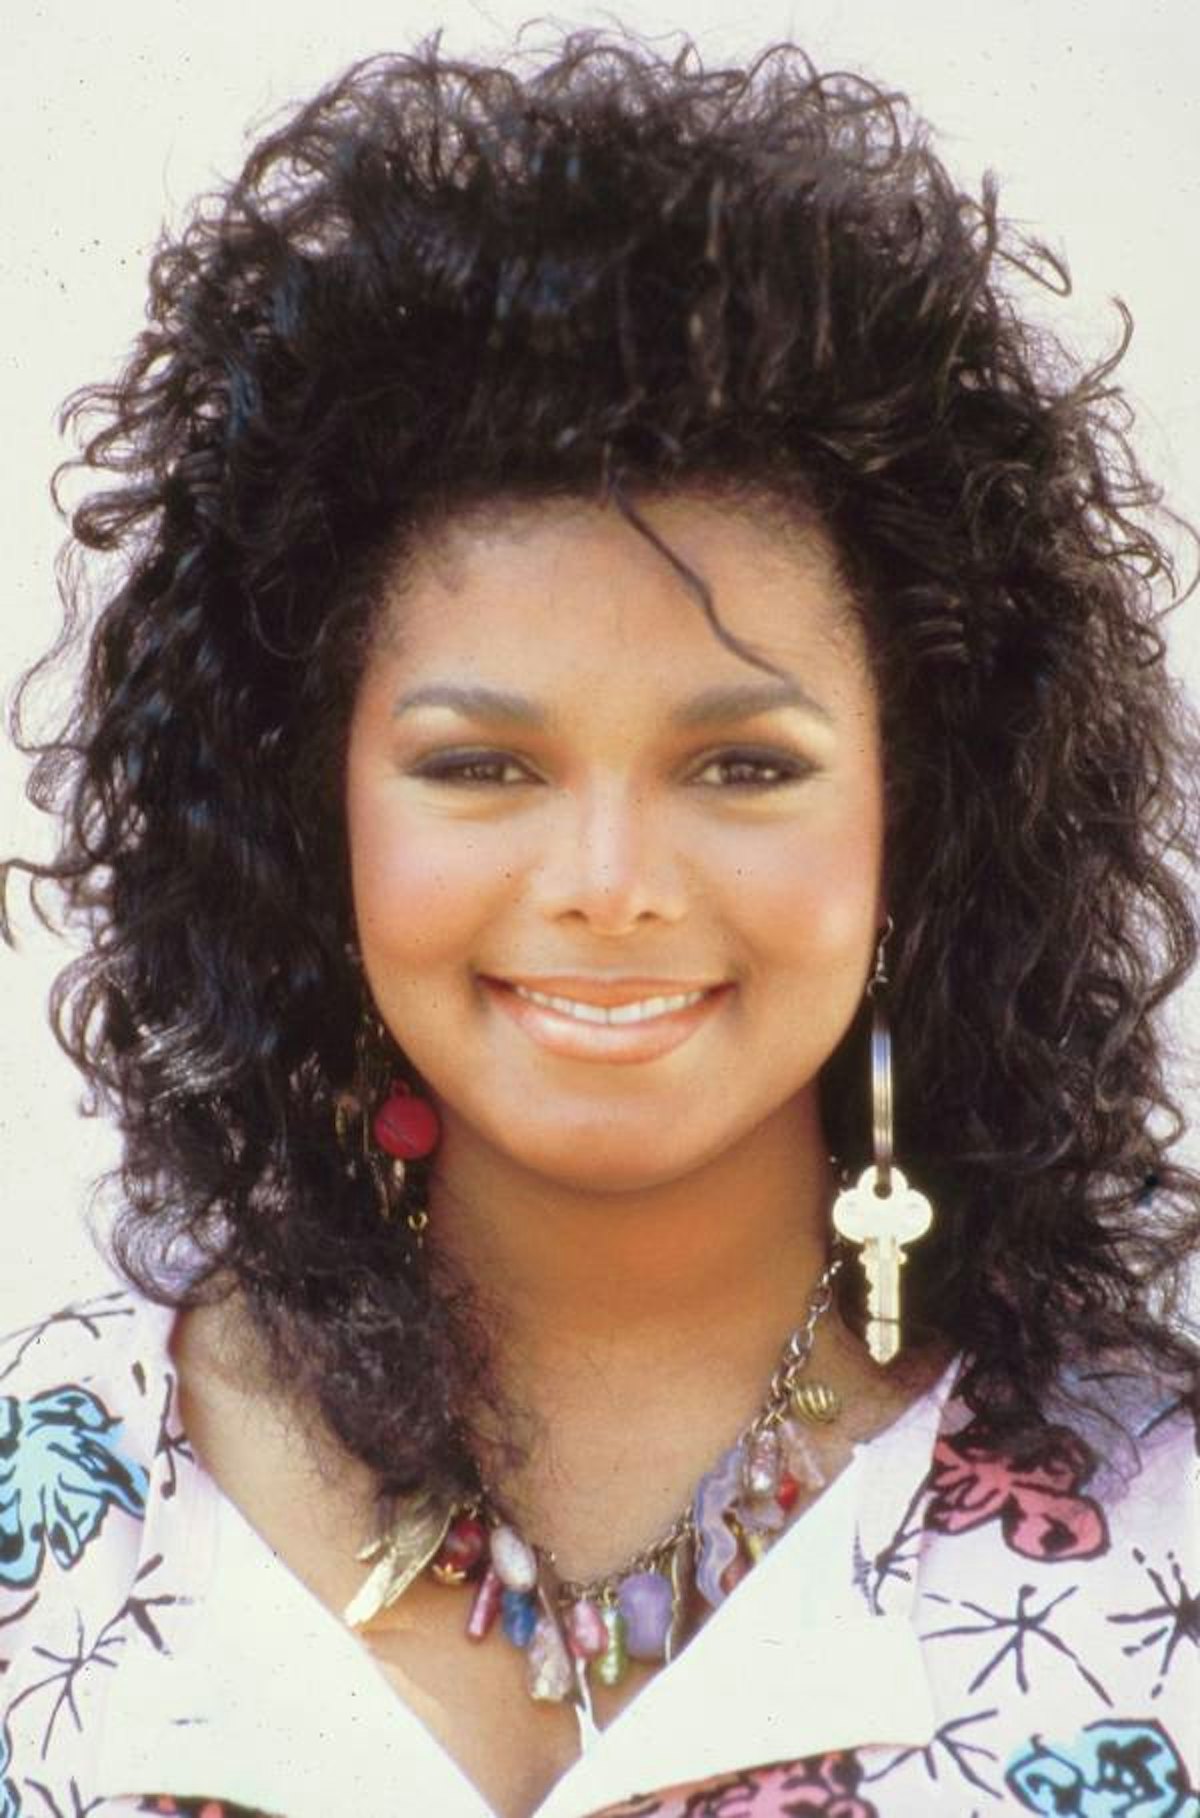 Hair Through History: 10 Popular Looks of the 1980s